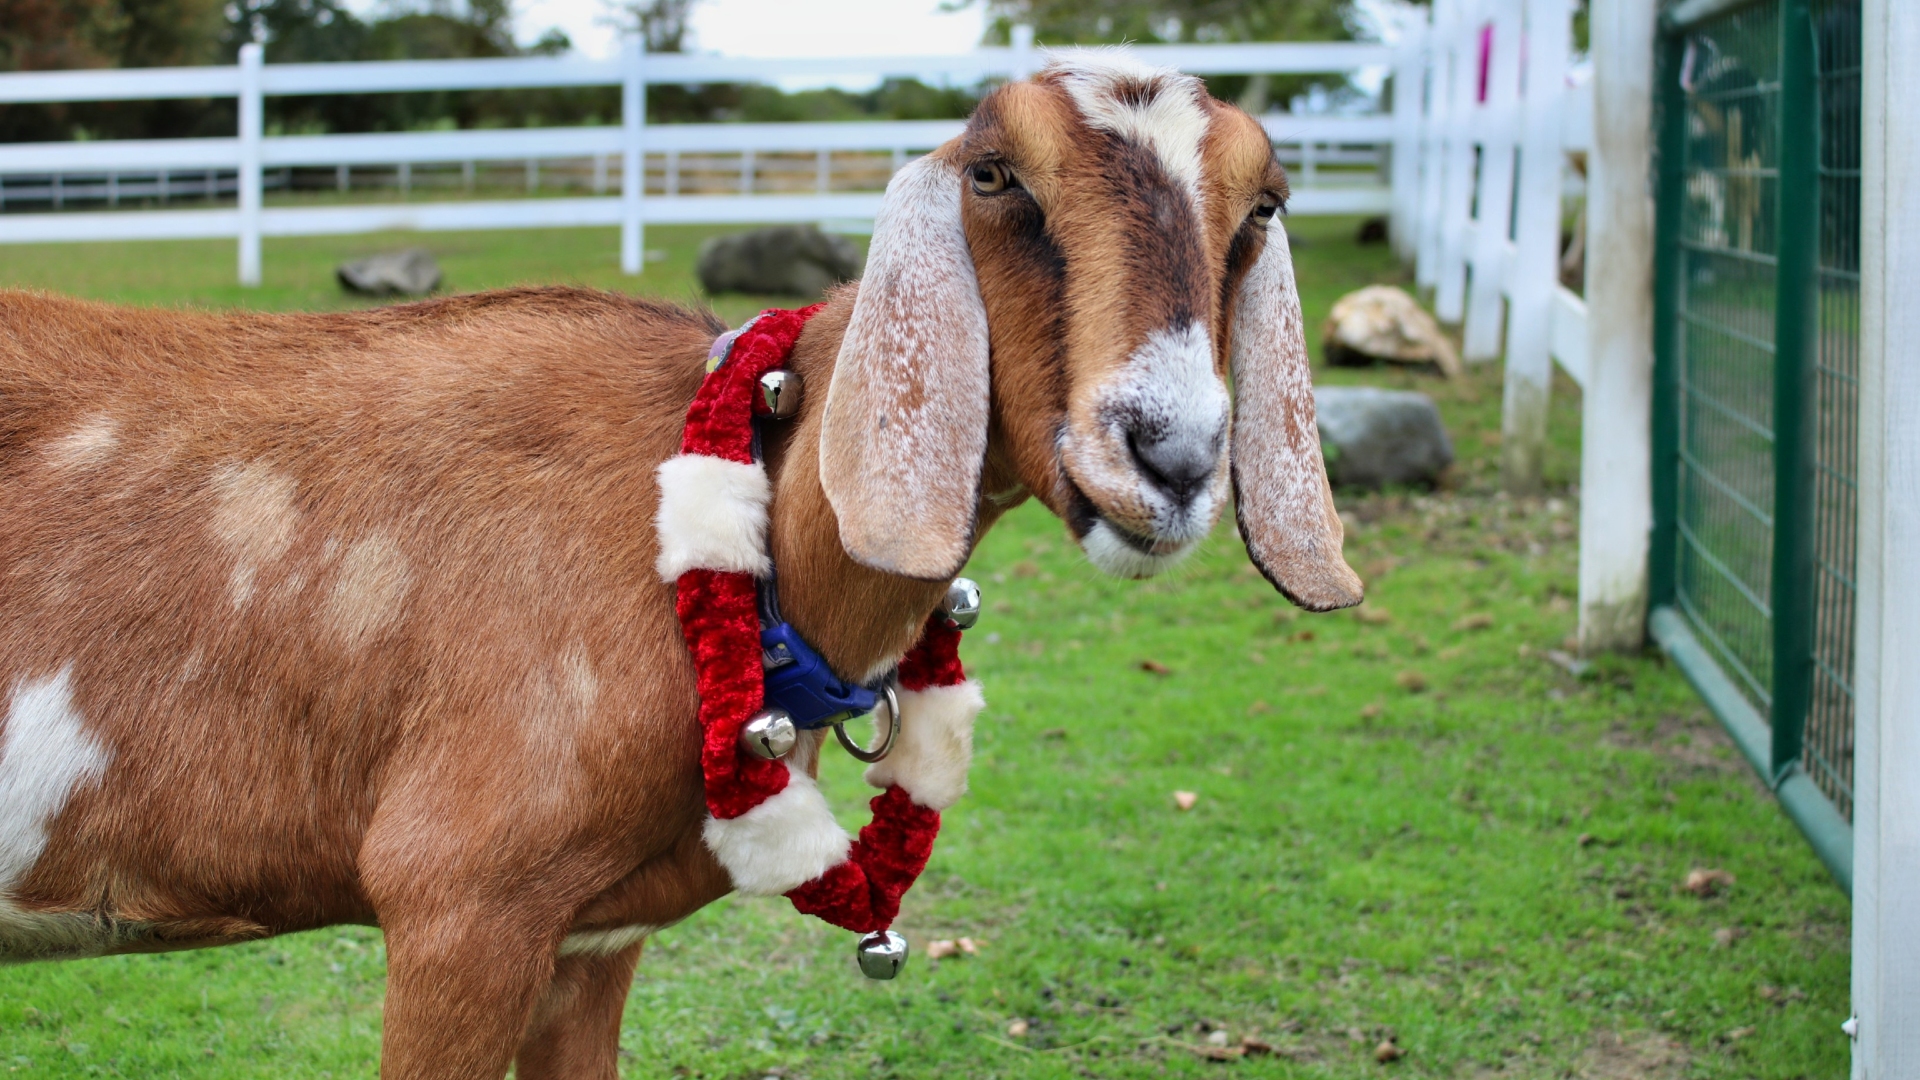 West Place Animal Sanctuary to host Holiday Shop & Stroll Nov. 24 - 26